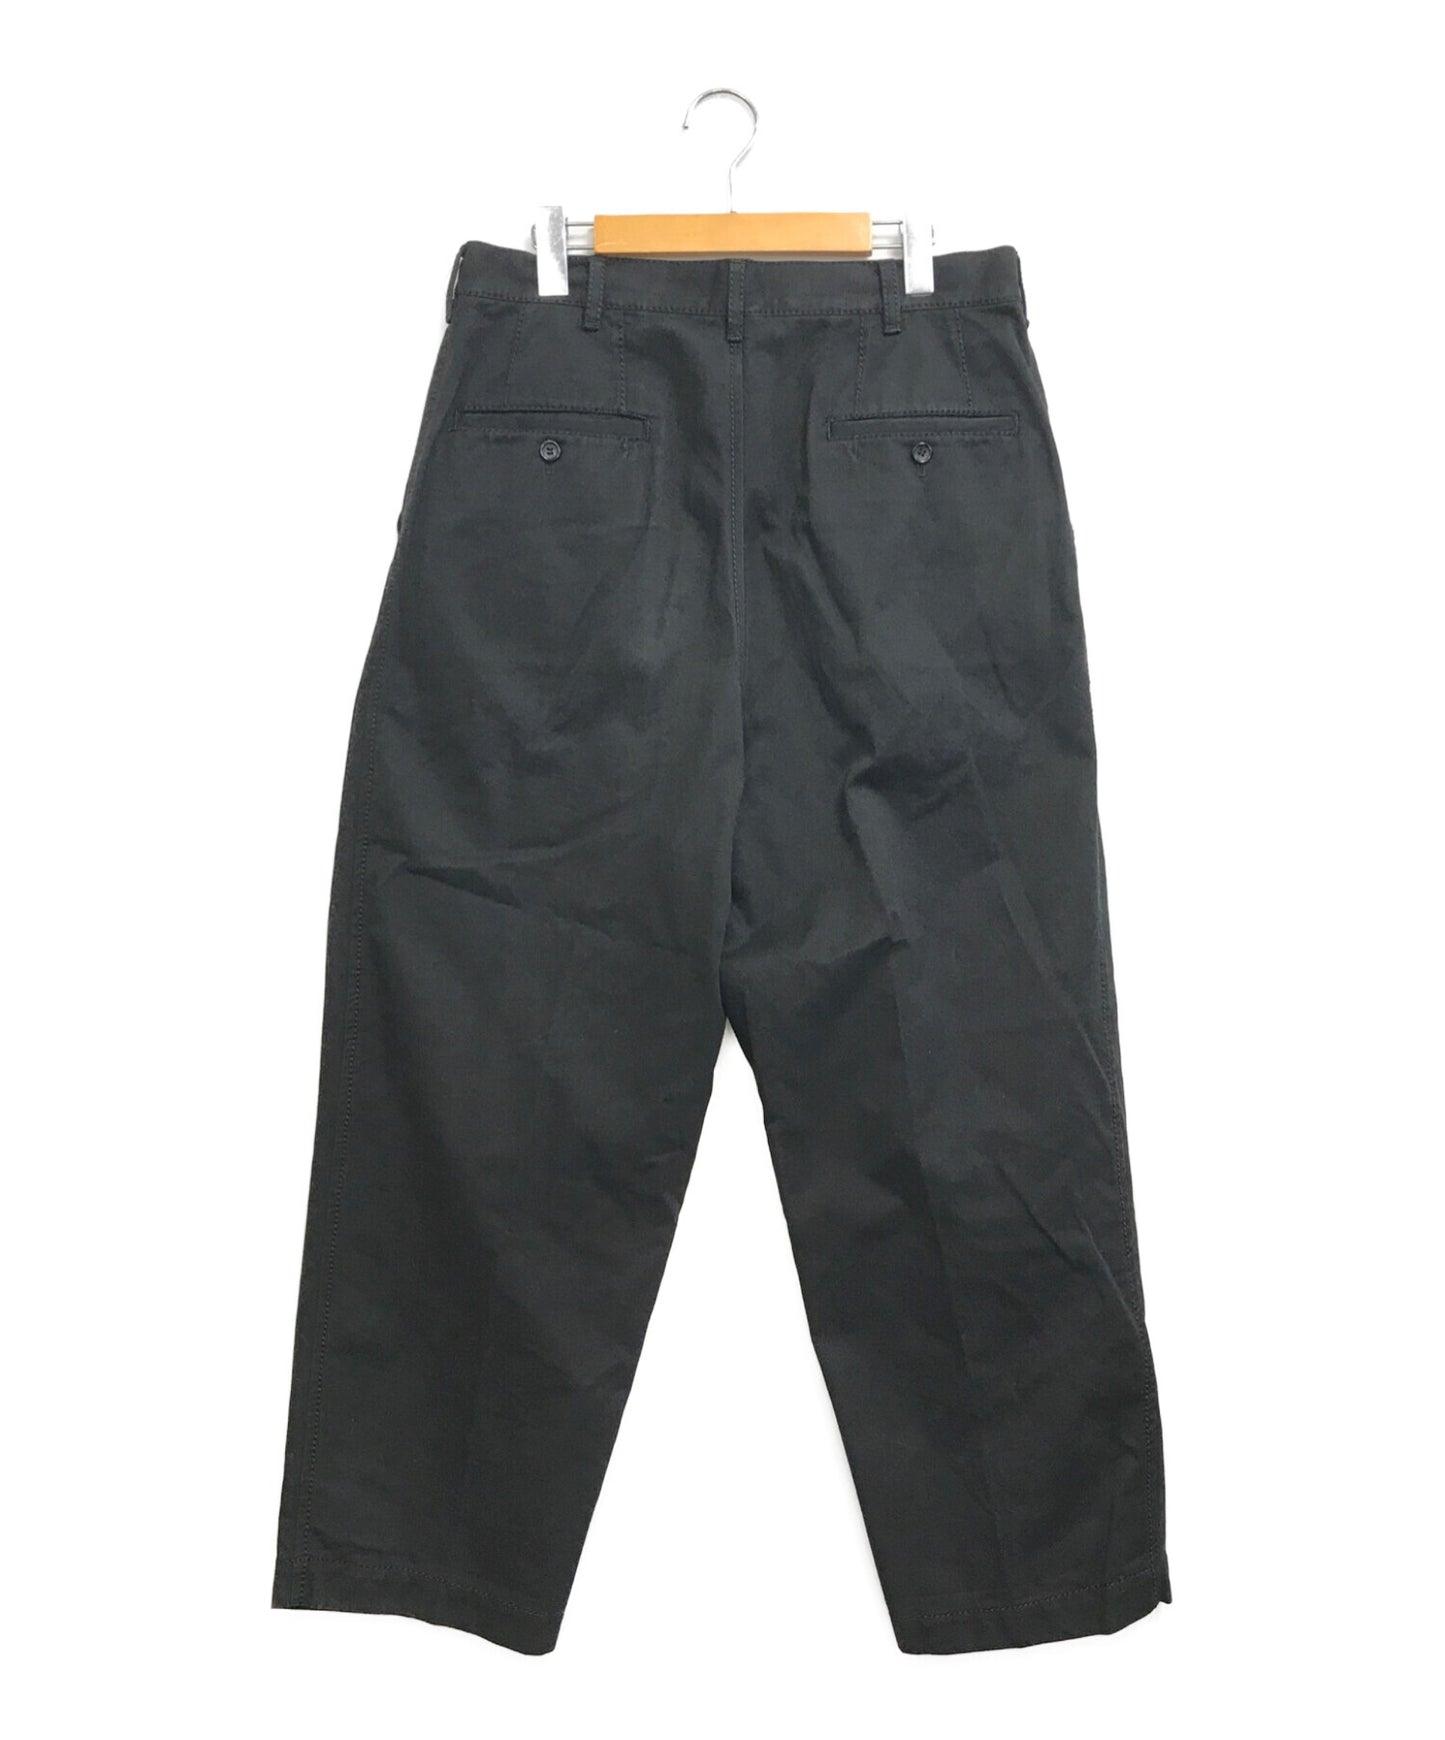 Comme des Garcons Homme Fat Stuck Tuck Chino Pants HF-P015